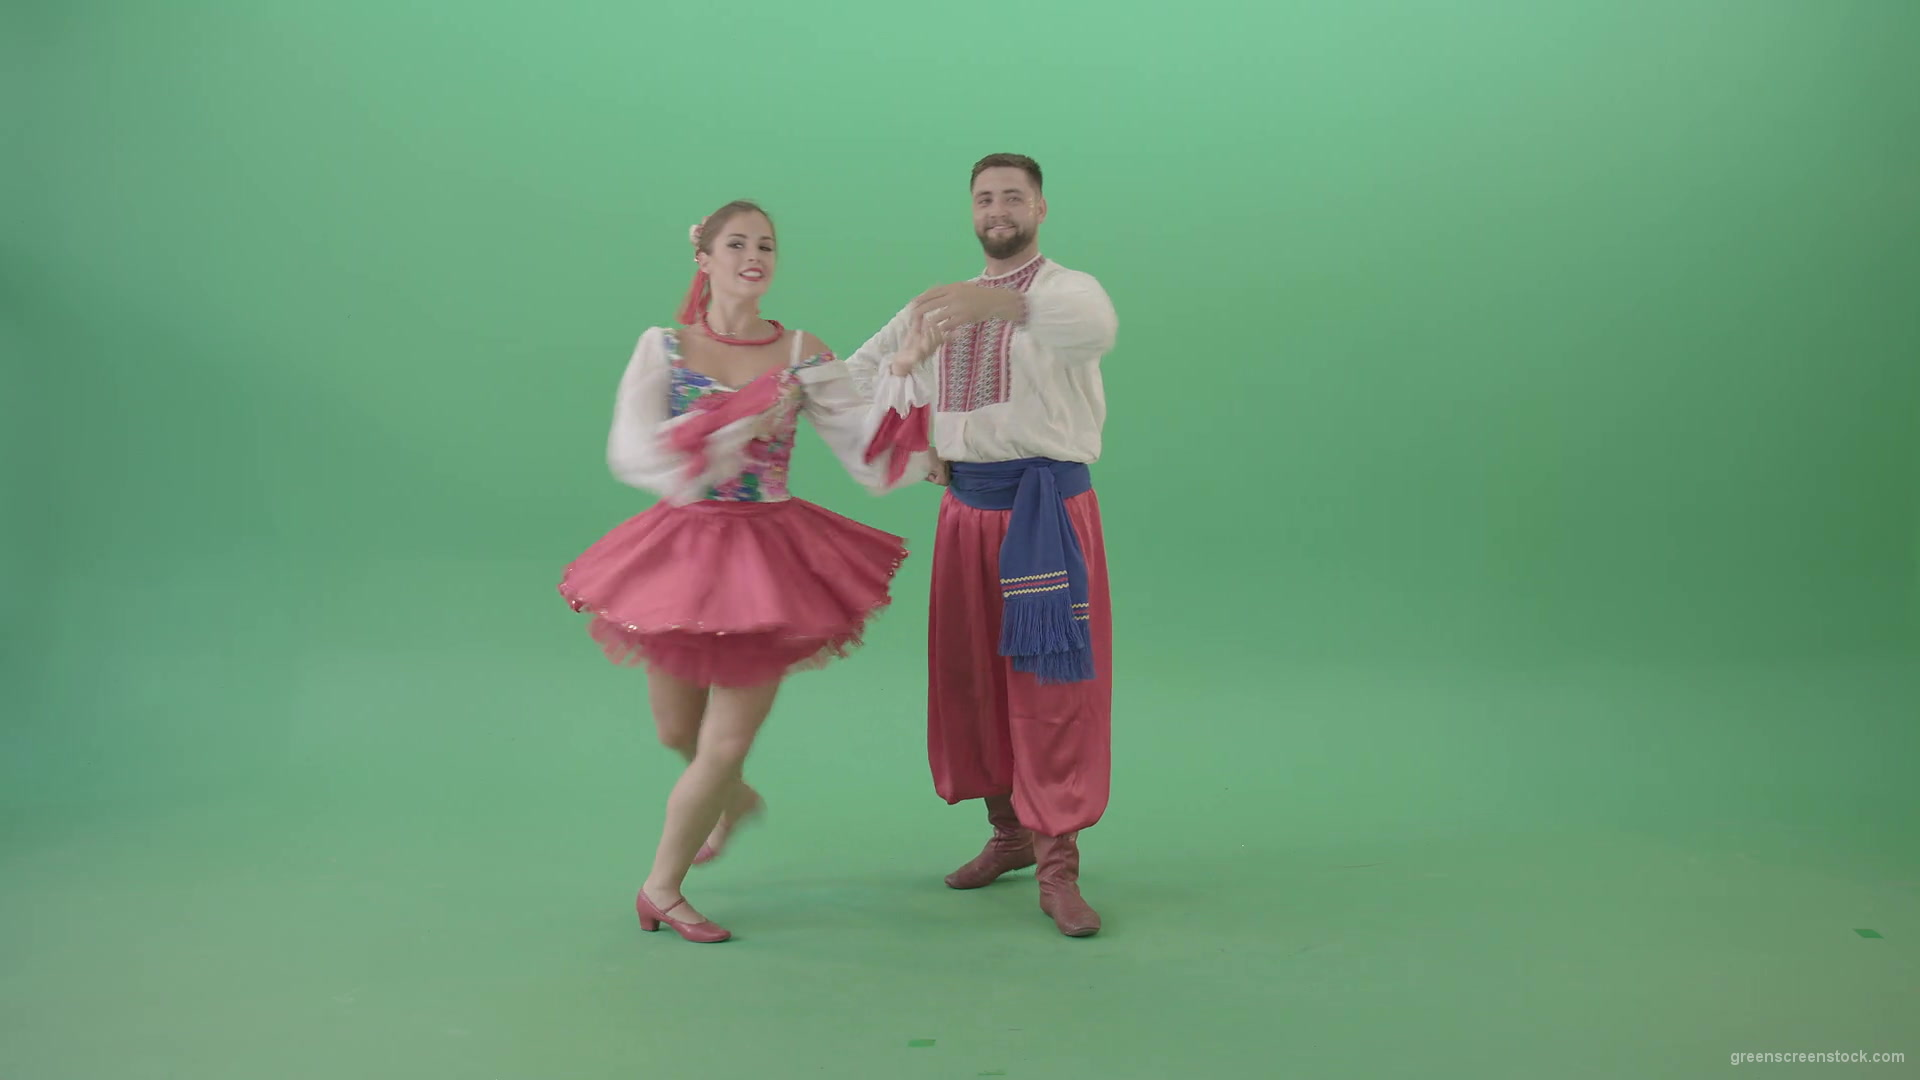 Folk-ethno-ukraine-dancing-boy-and-girl-isolated-on-green-screen-30-fps-4K-Video-Footage-1920_009 Green Screen Stock